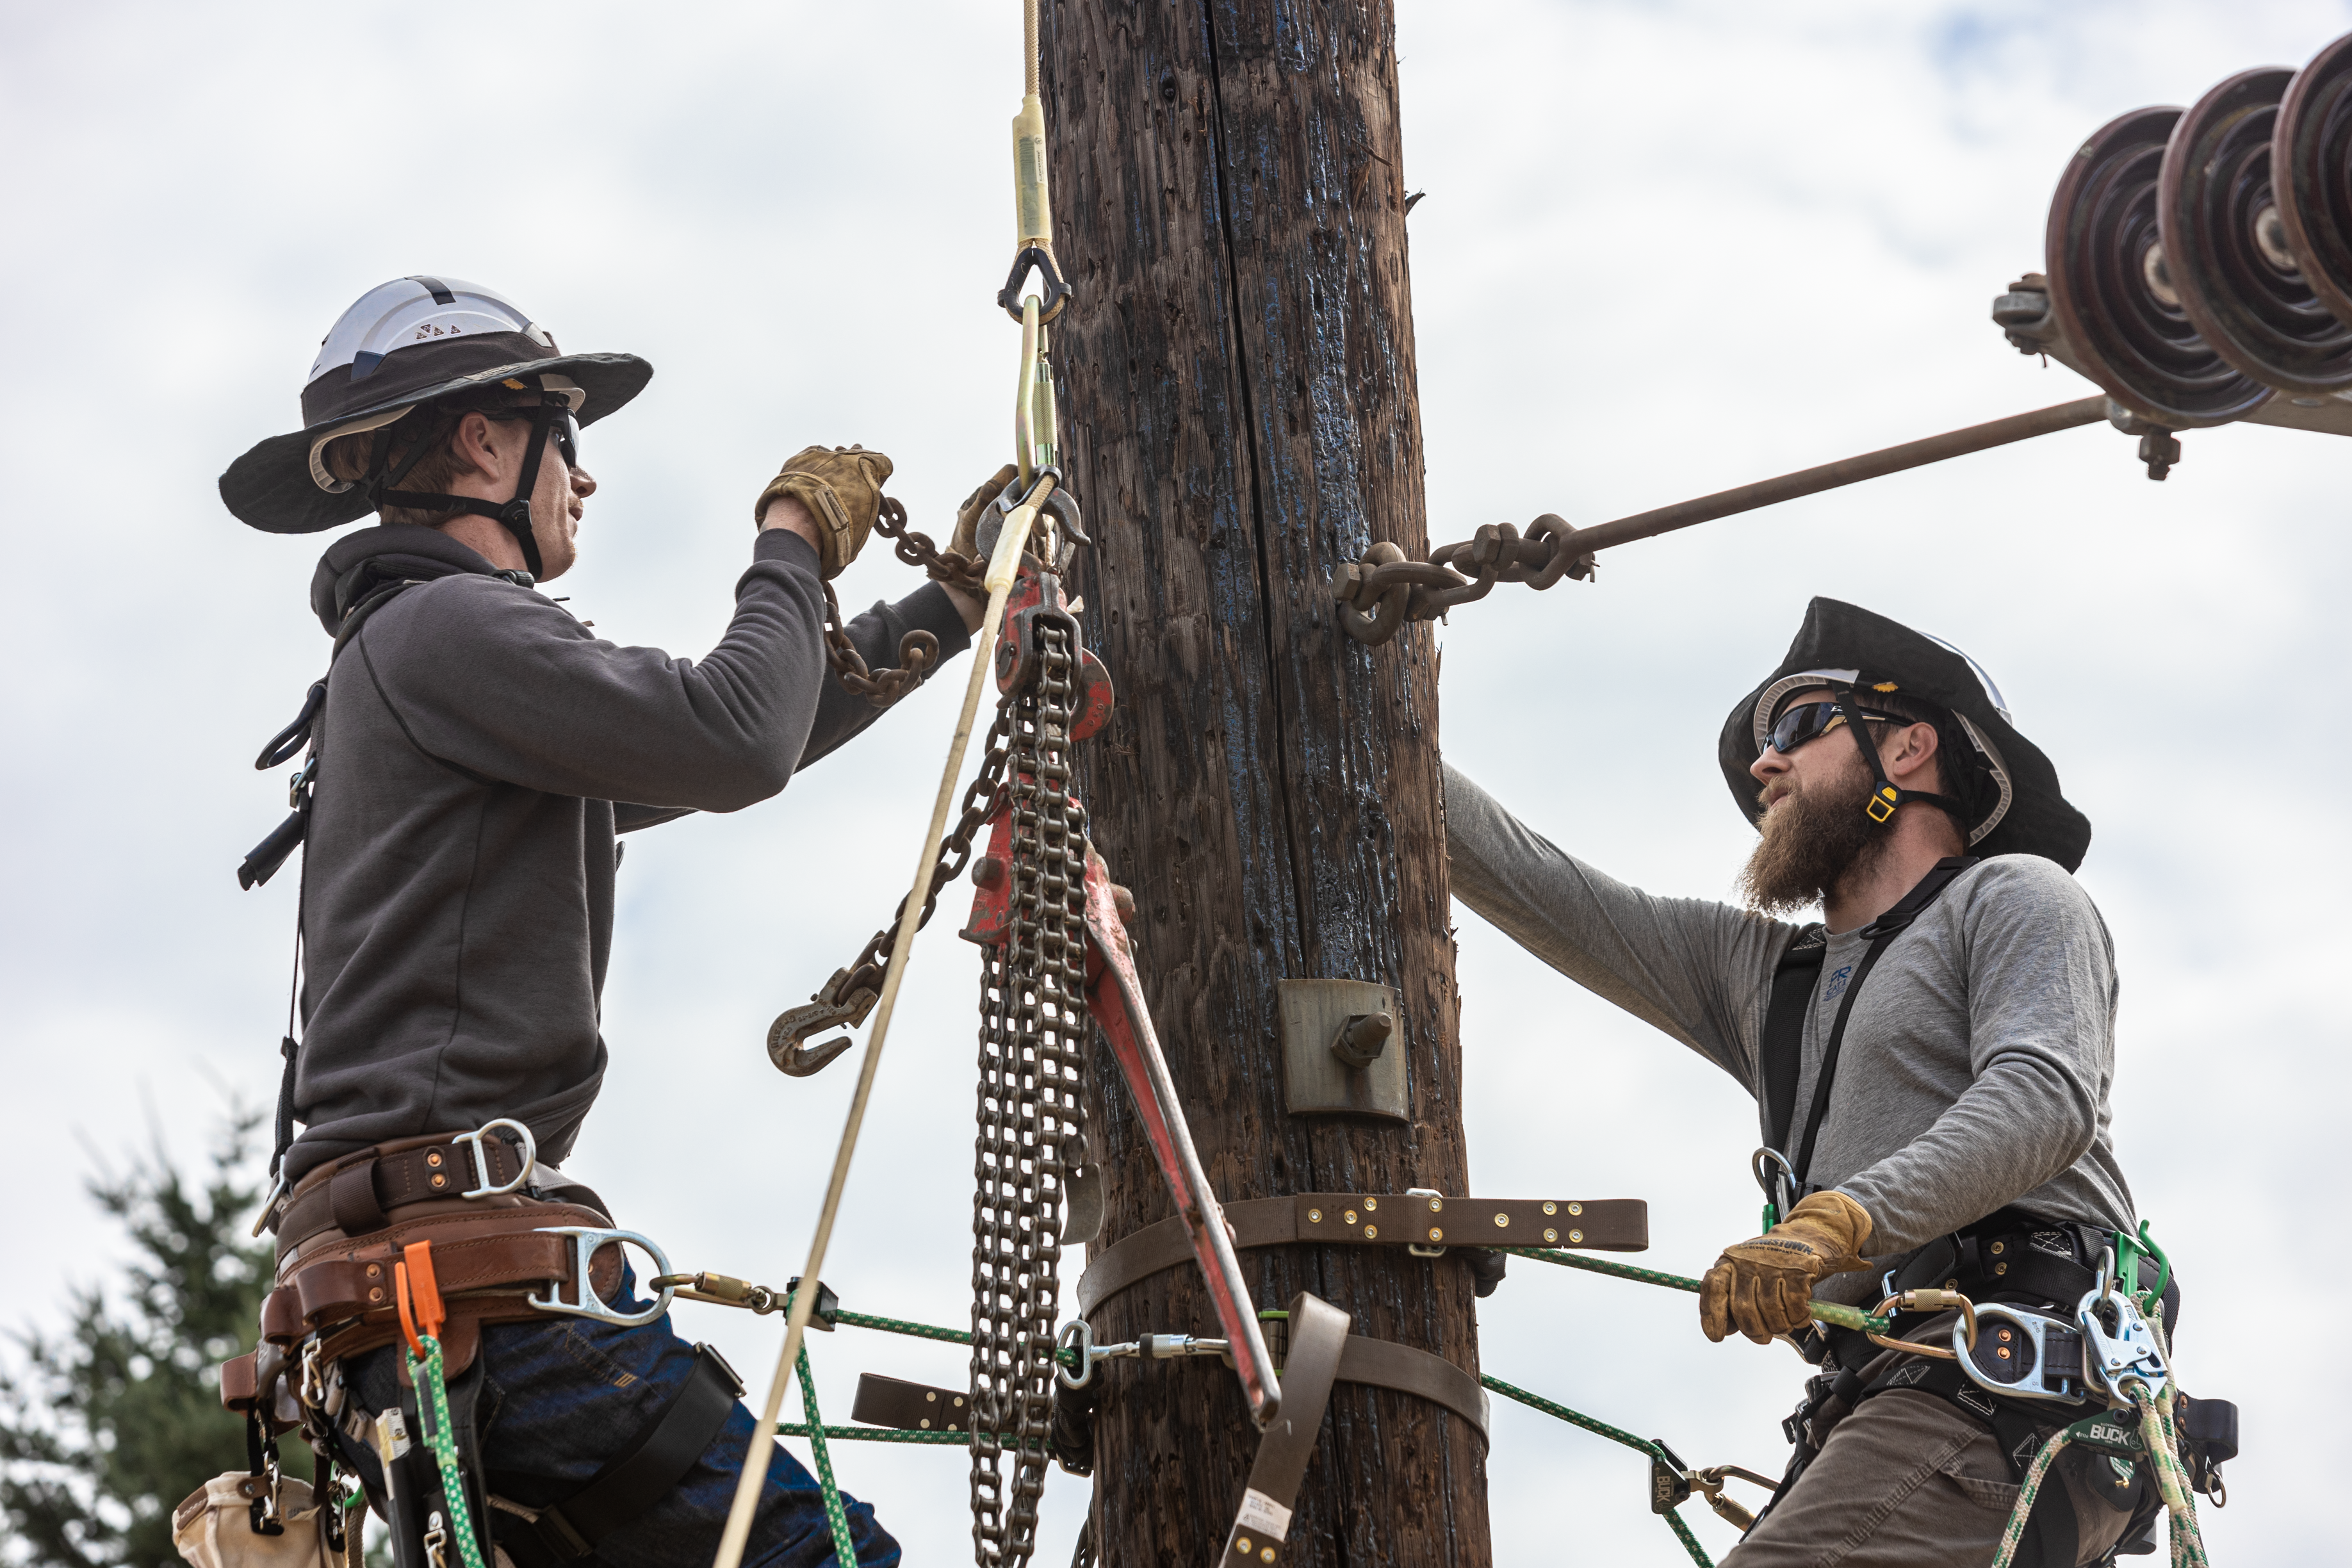 two lineworkers wearing a hard hats and harnesses working on a line, attached to a pole, cloudy sky and a tree in the background